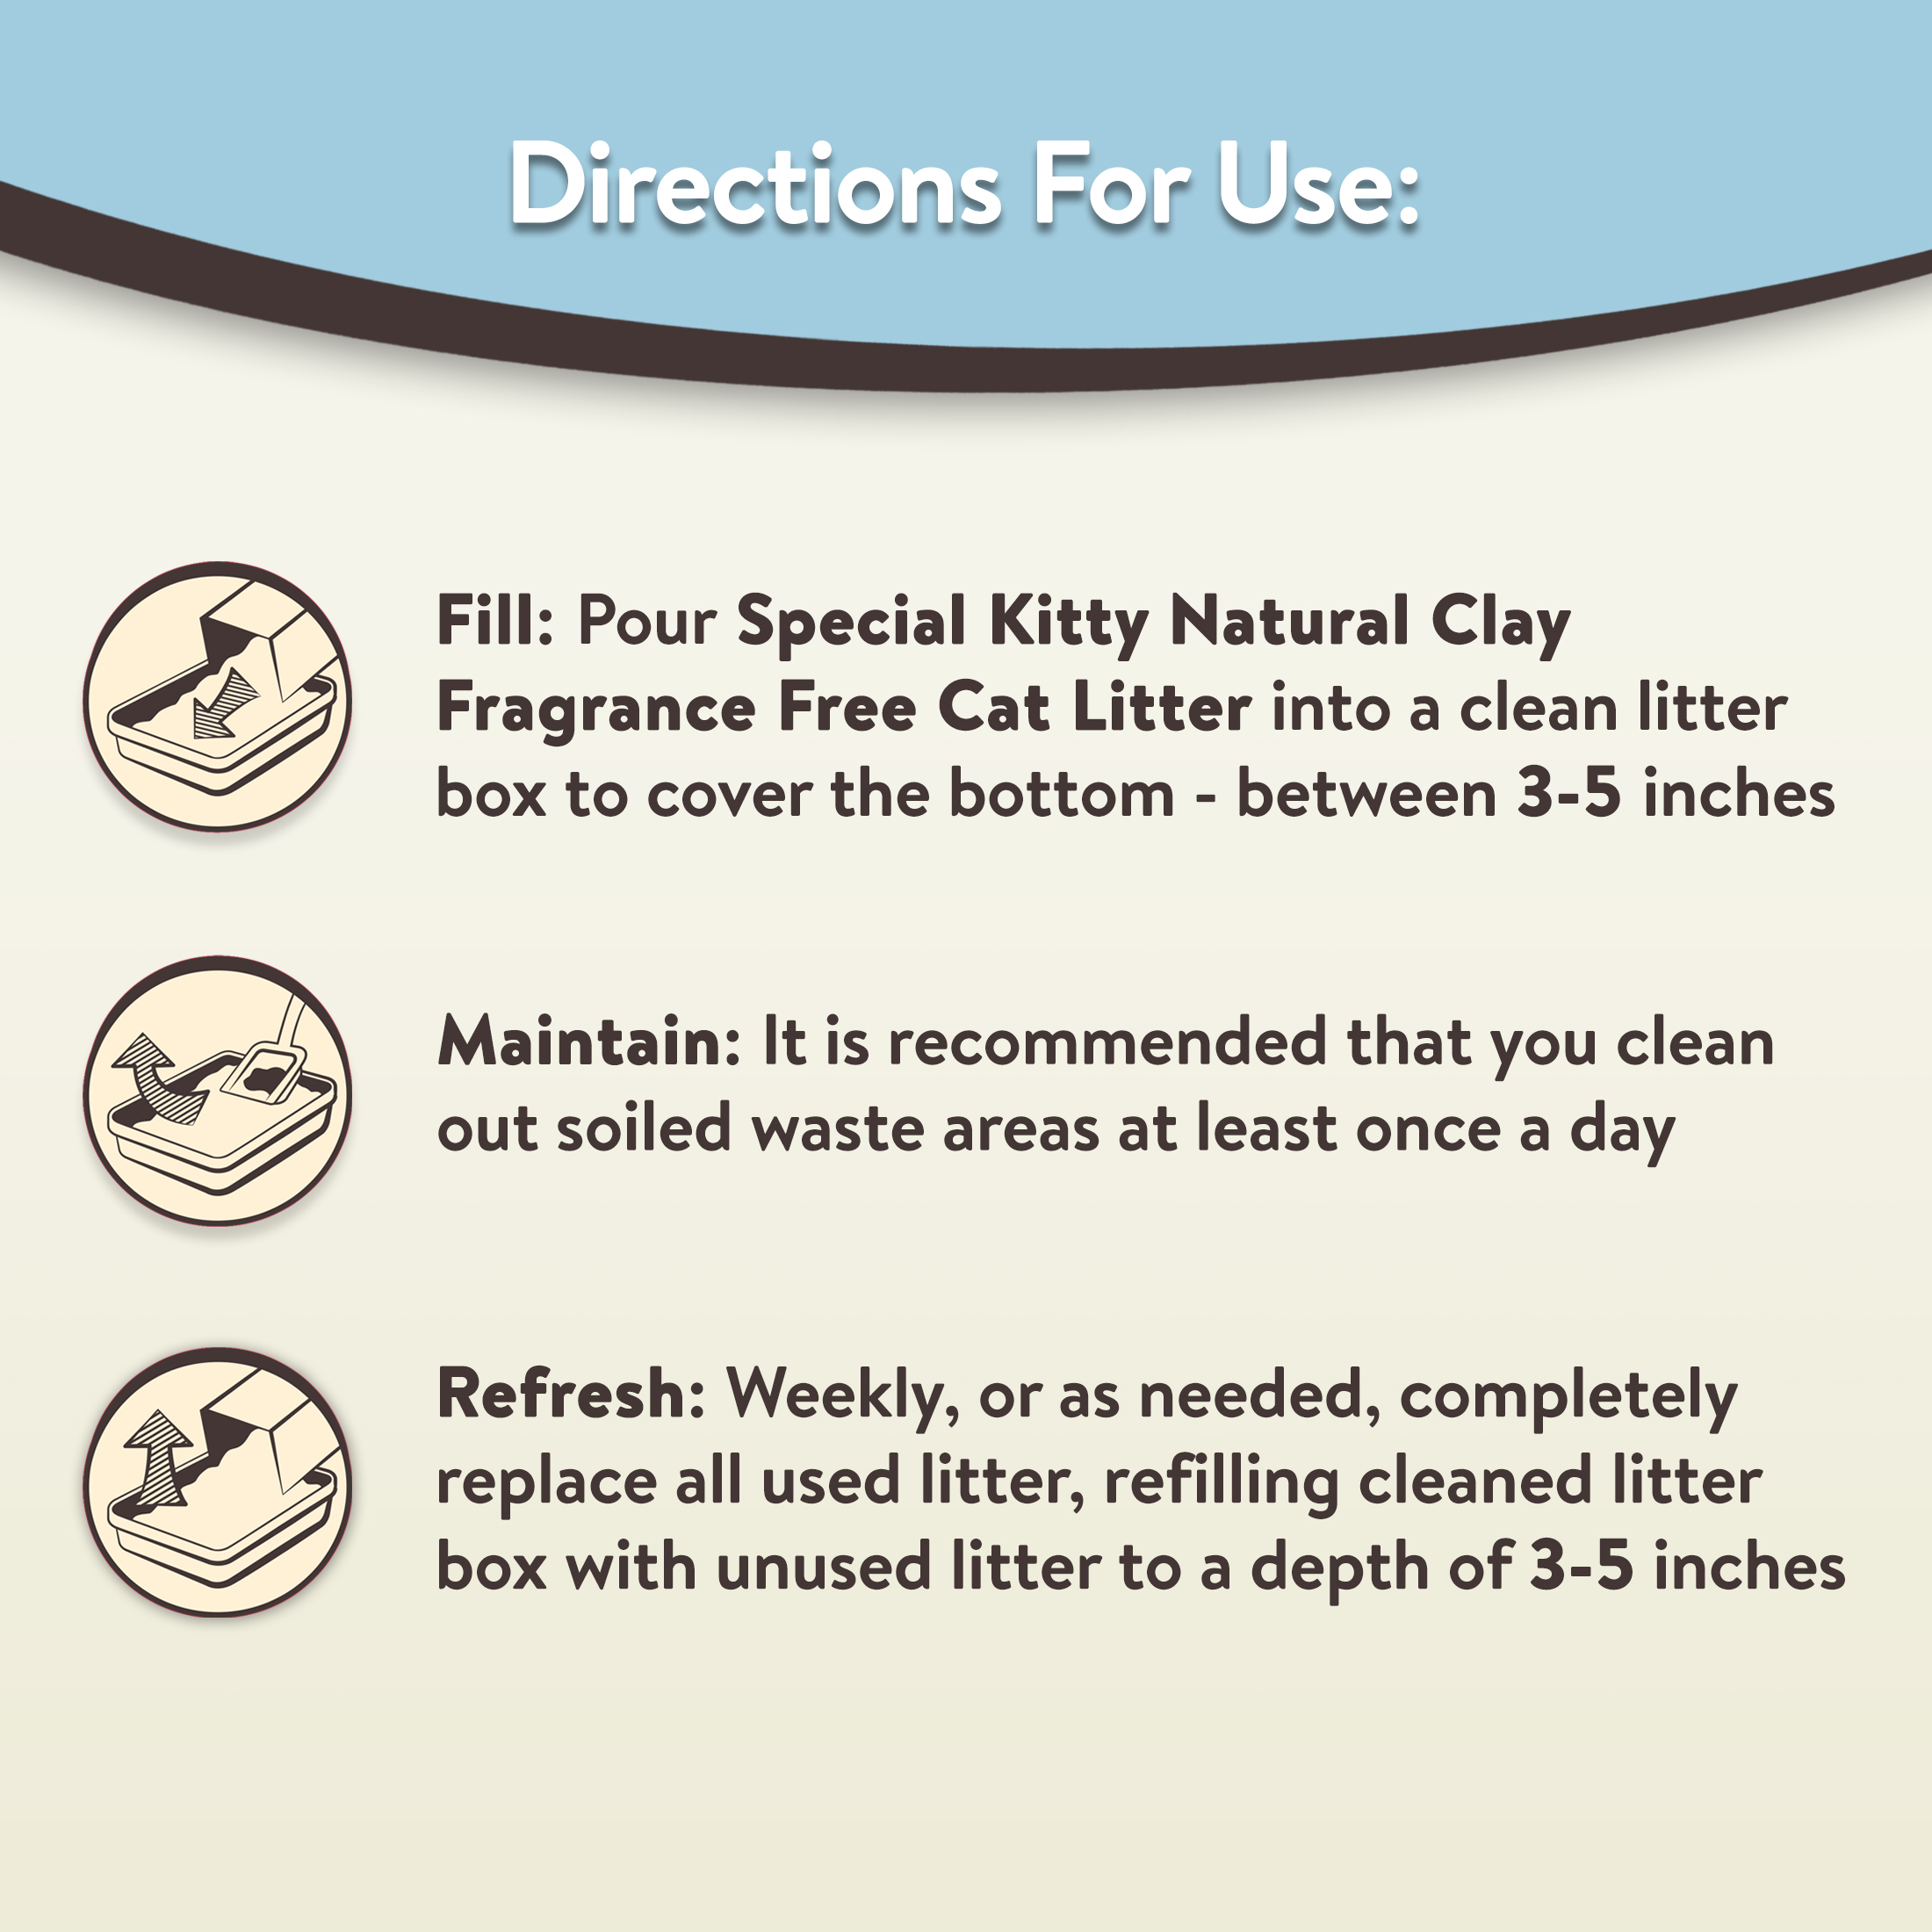 Special Kitty Lightweight & Scoopable Clumping Cat Litter, Fresh Scent, 8.5 lb - image 3 of 7